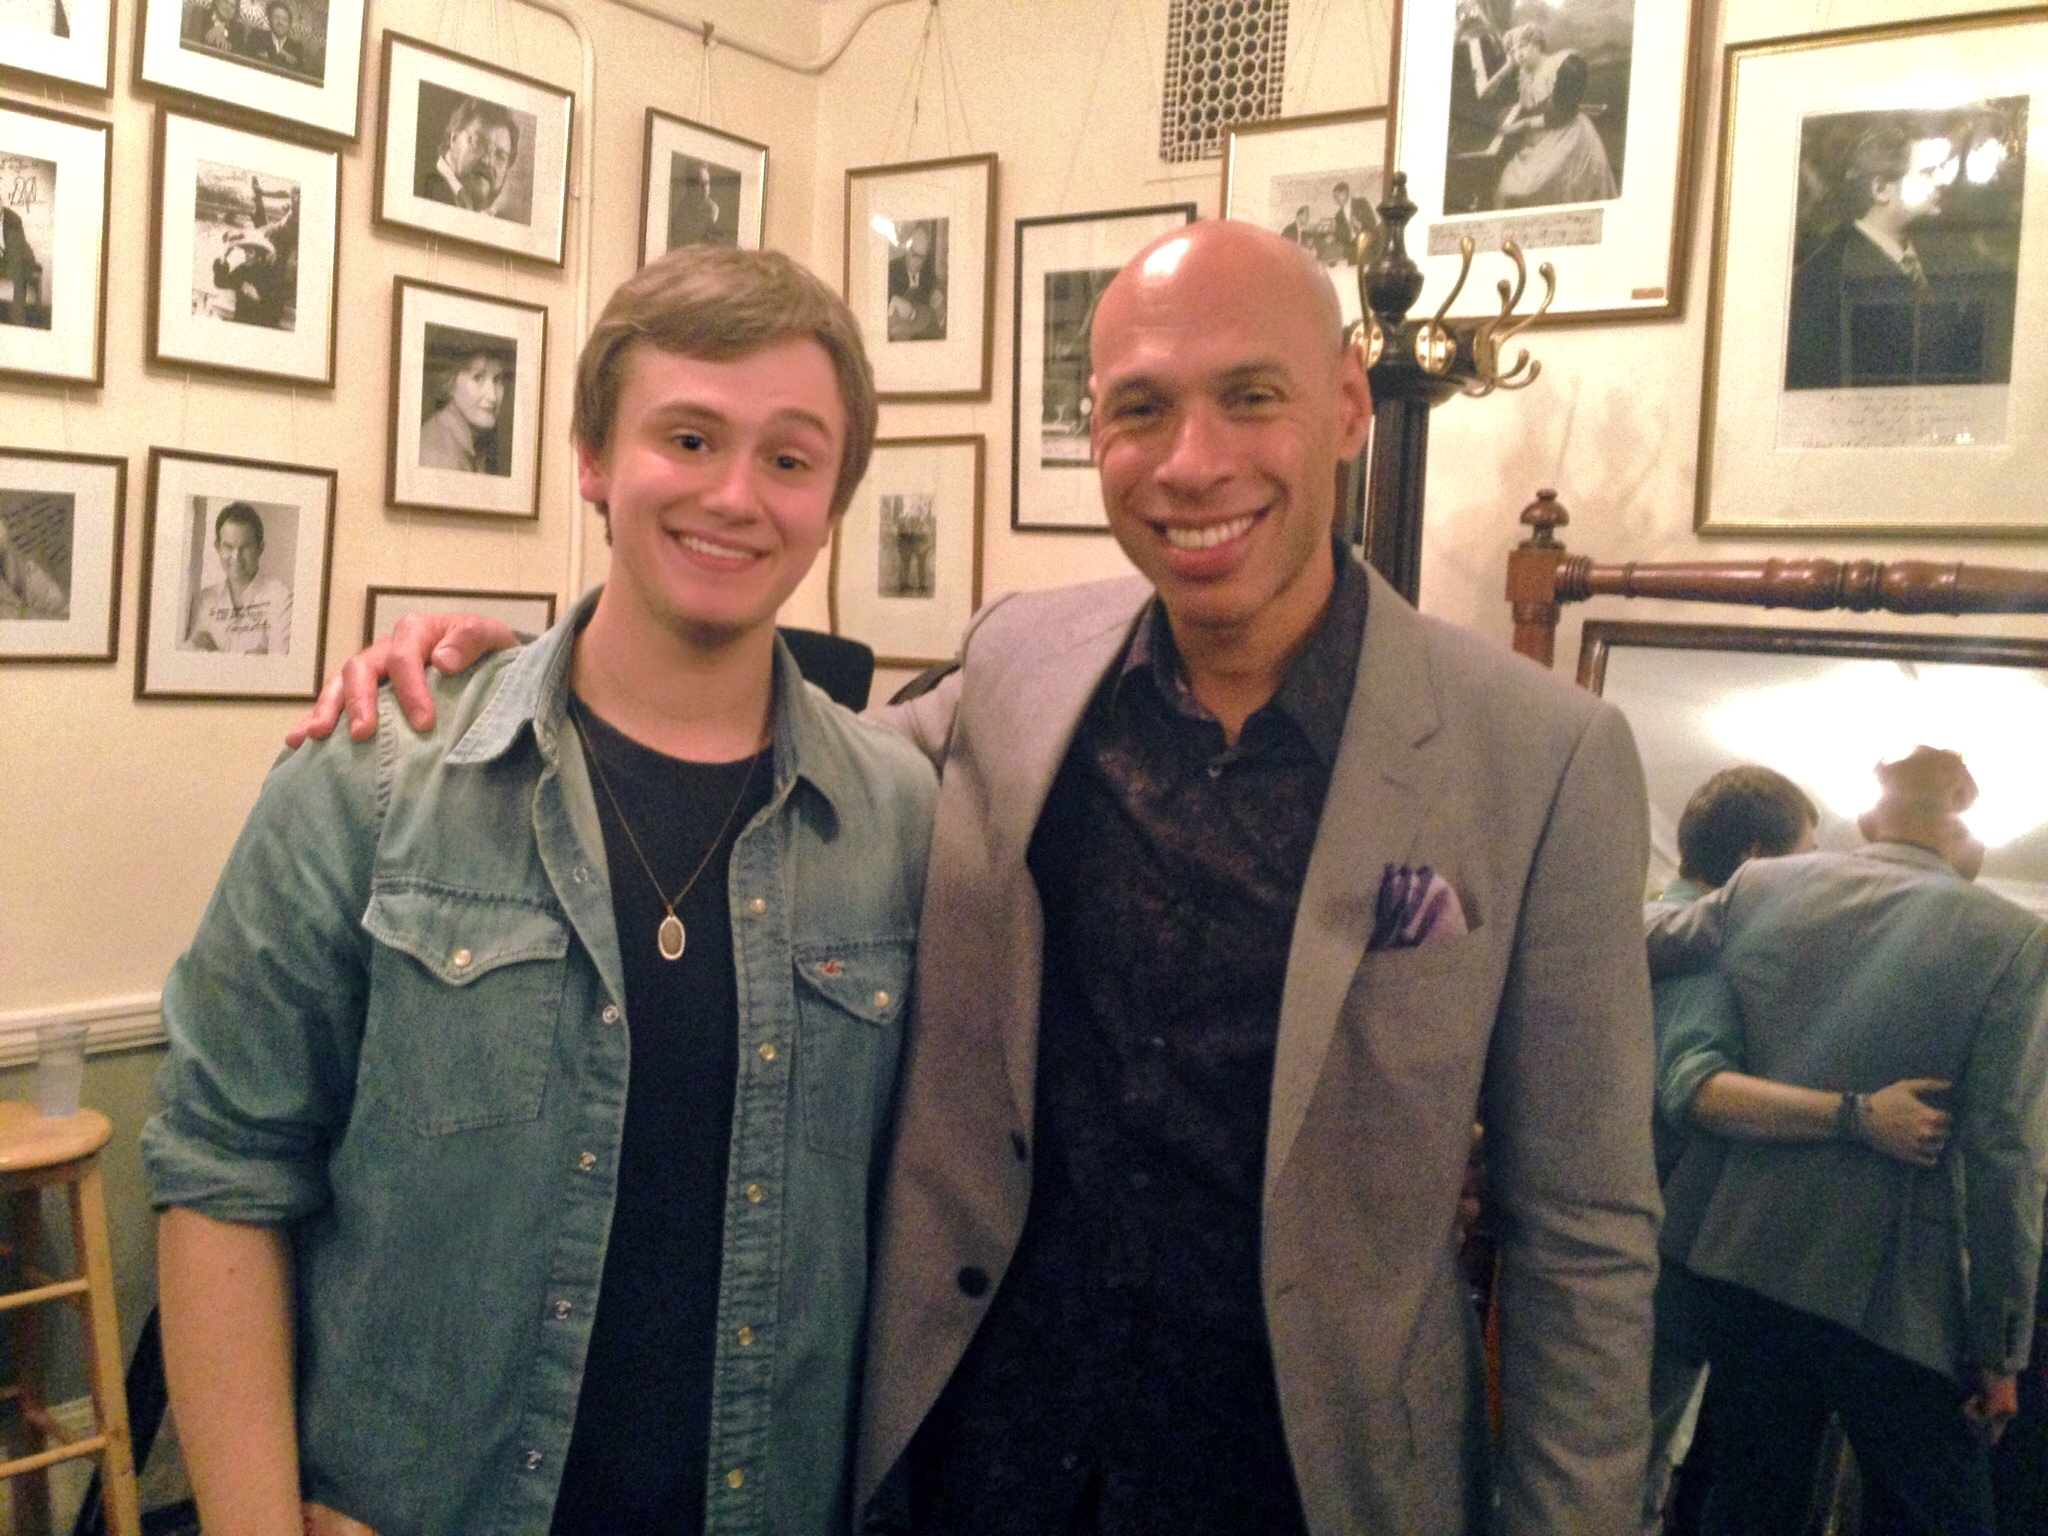  Harry Bolt backstage at the Wigmore Hall with Joshua Redman. 